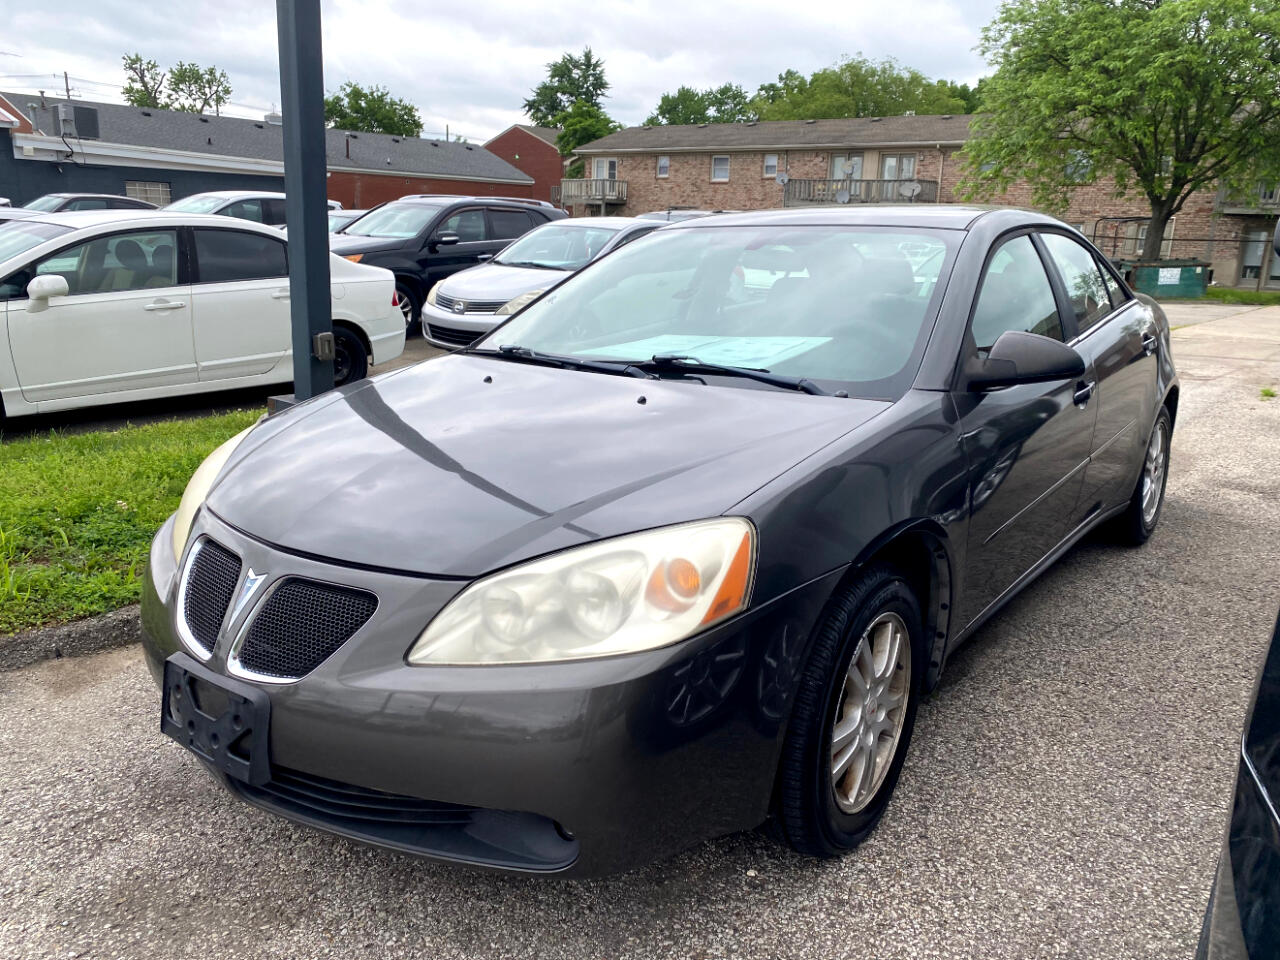 Used 2006 Pontiac G6  with VIN 1G2ZG558X64258580 for sale in Louisville, KY